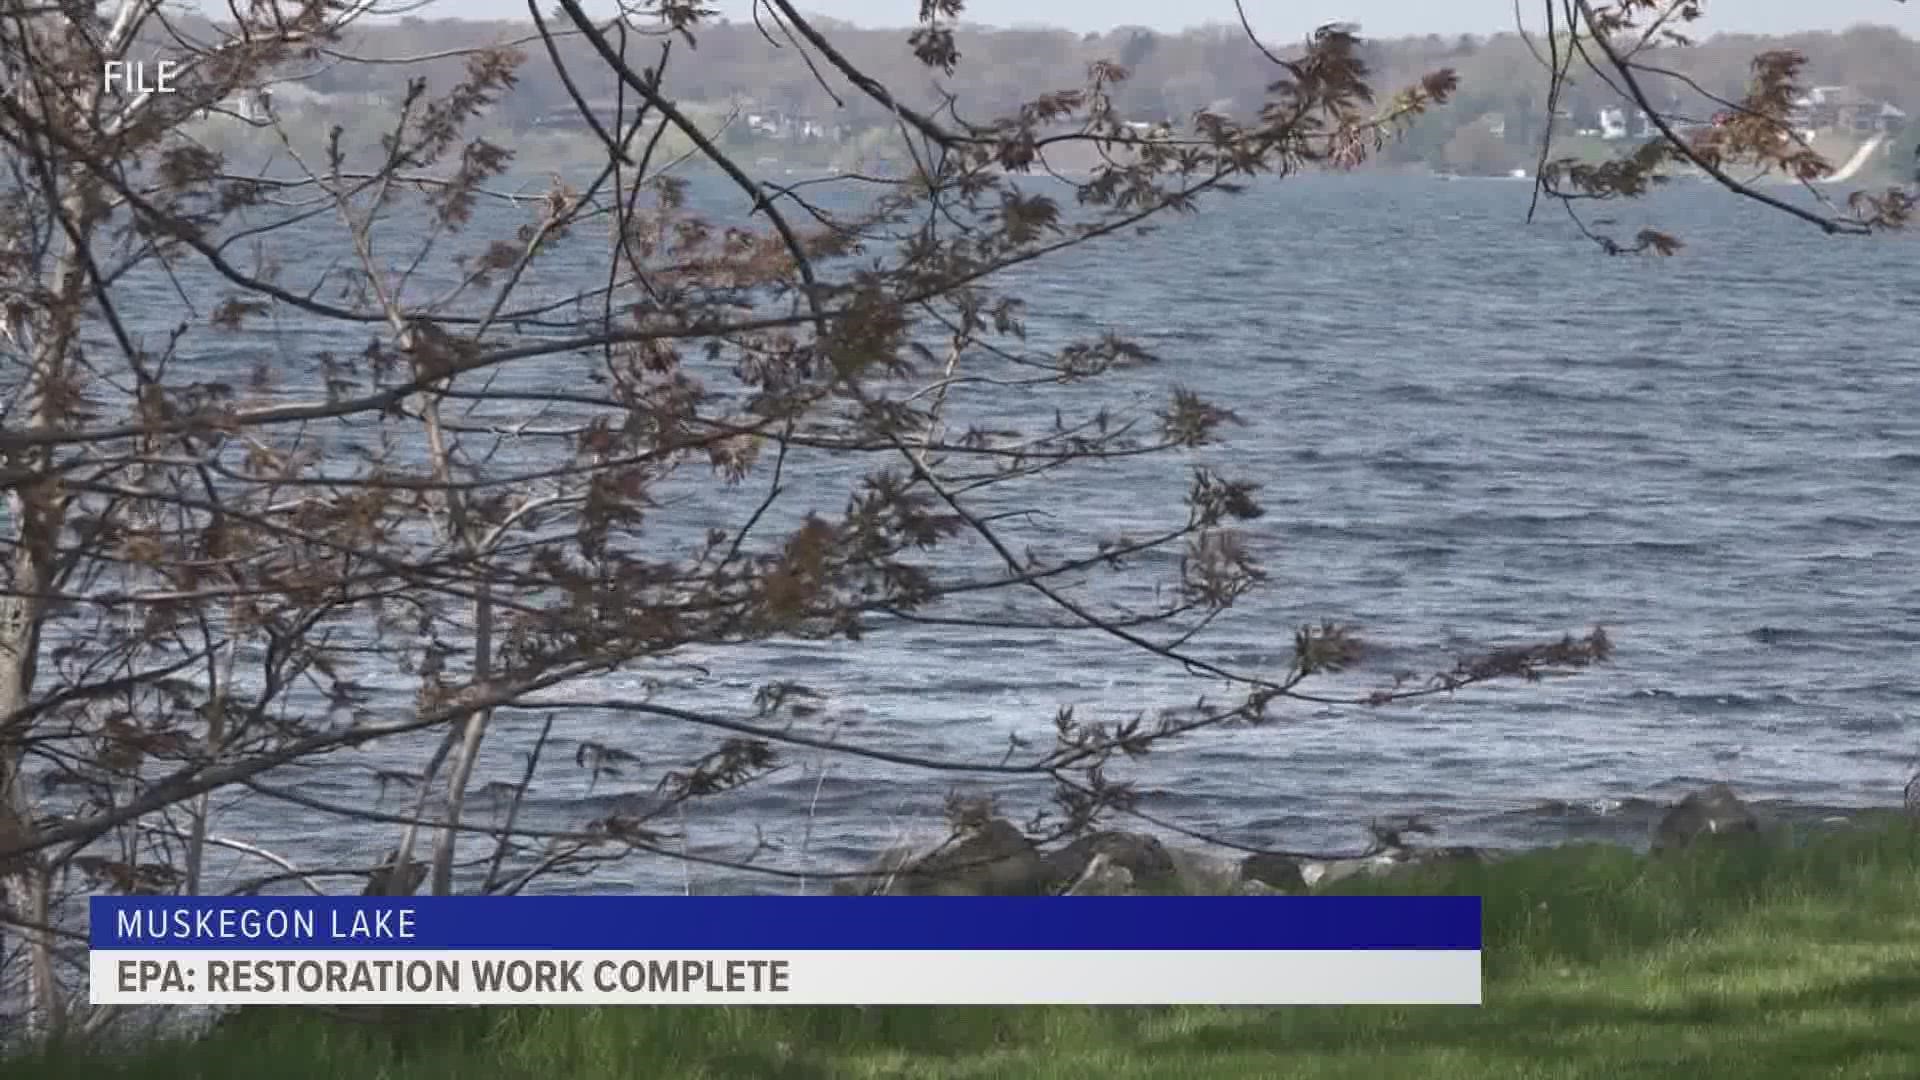 For years, the lake was polluted by heavy industry. Community leaders made the announcement that every action item on the cleanup list is complete.